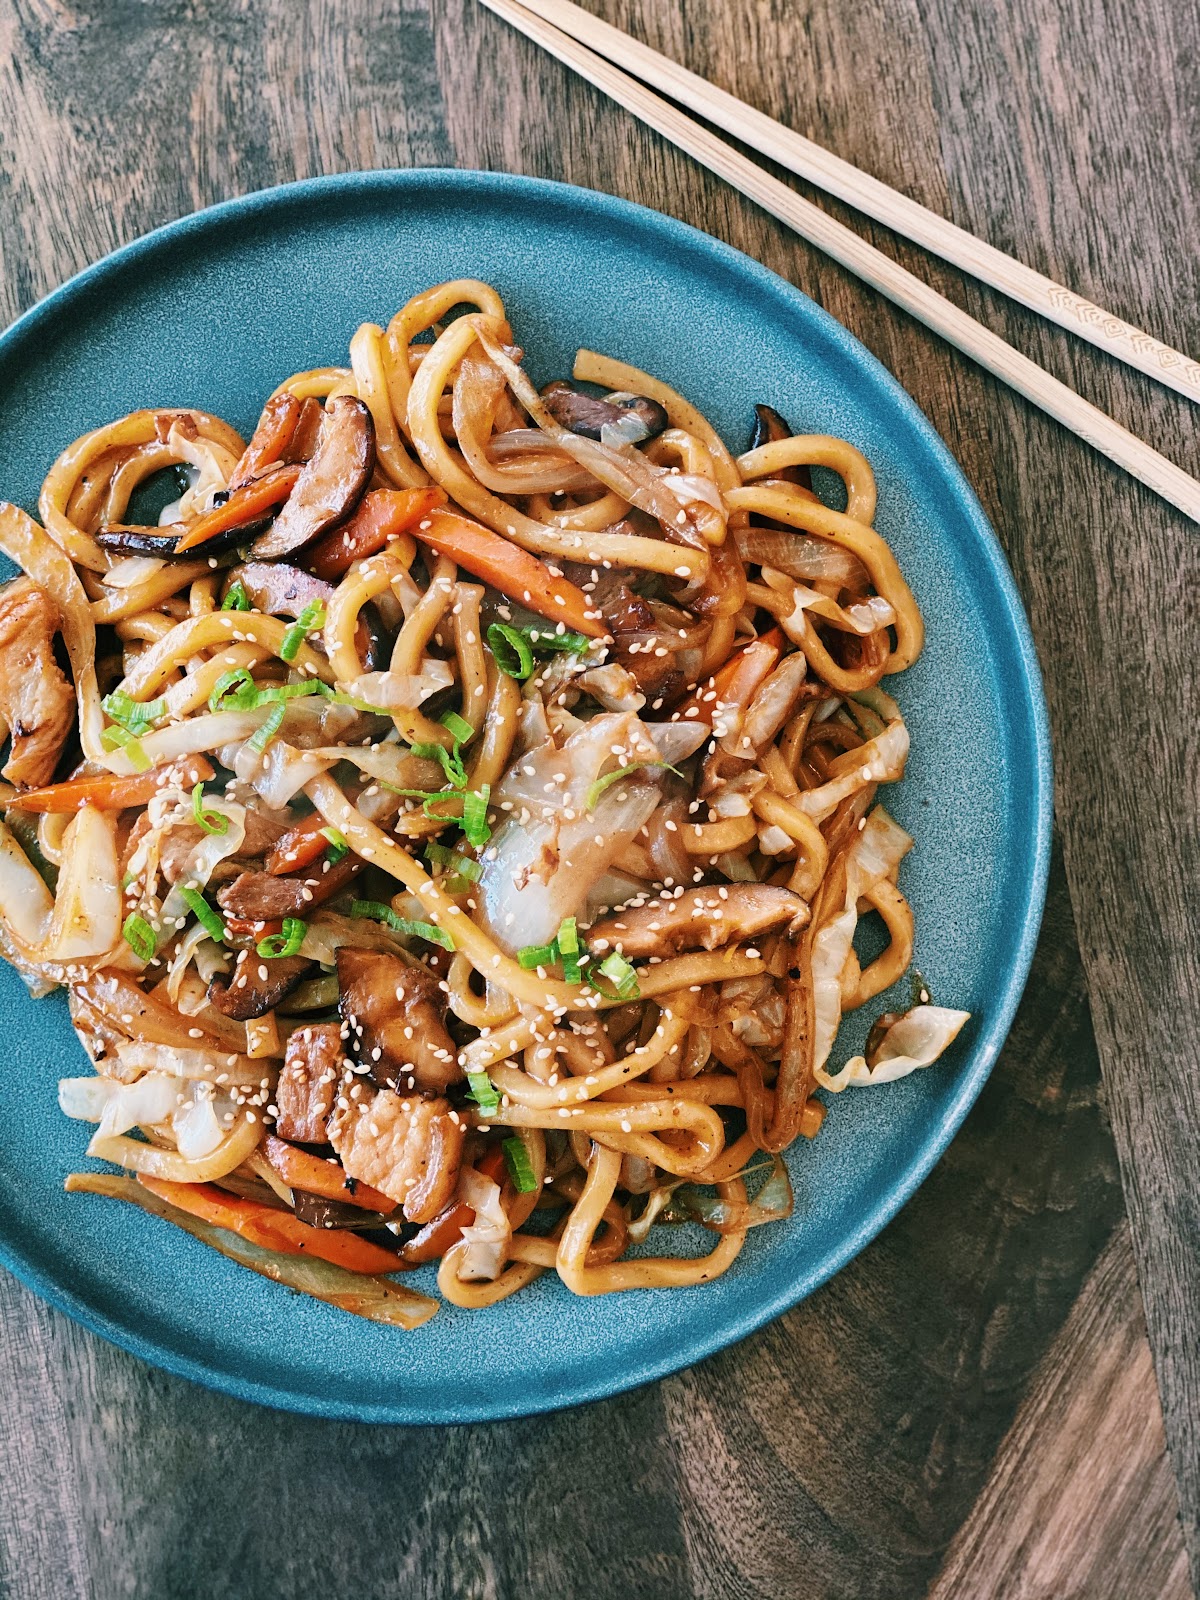 Stir-fried Yaki Udon noodles in a savory sauce with vegetables and pork, garnished with green onions, served in a bowl for a flavorful meal.